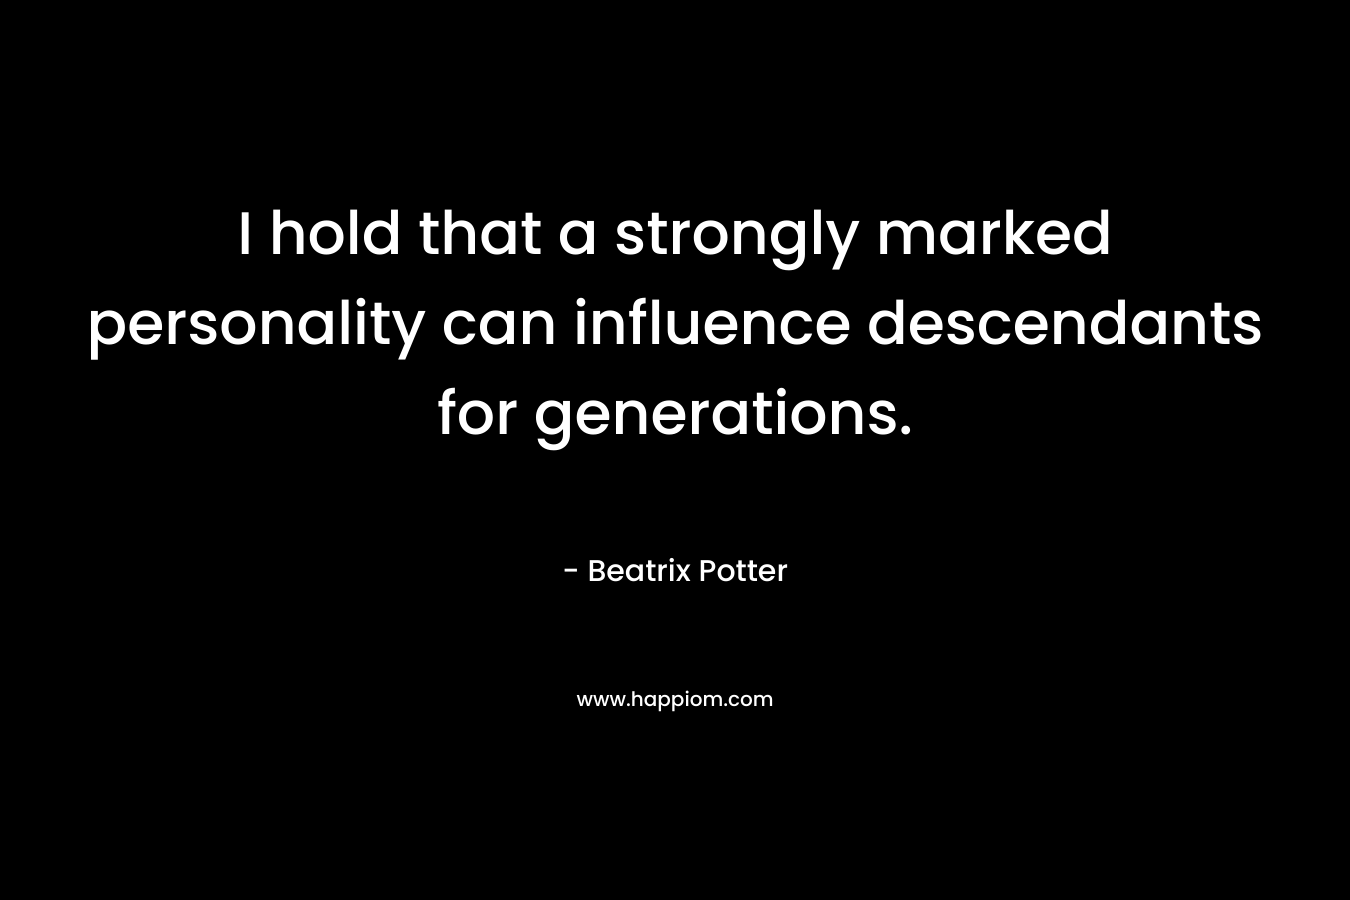 I hold that a strongly marked personality can influence descendants for generations. – Beatrix Potter